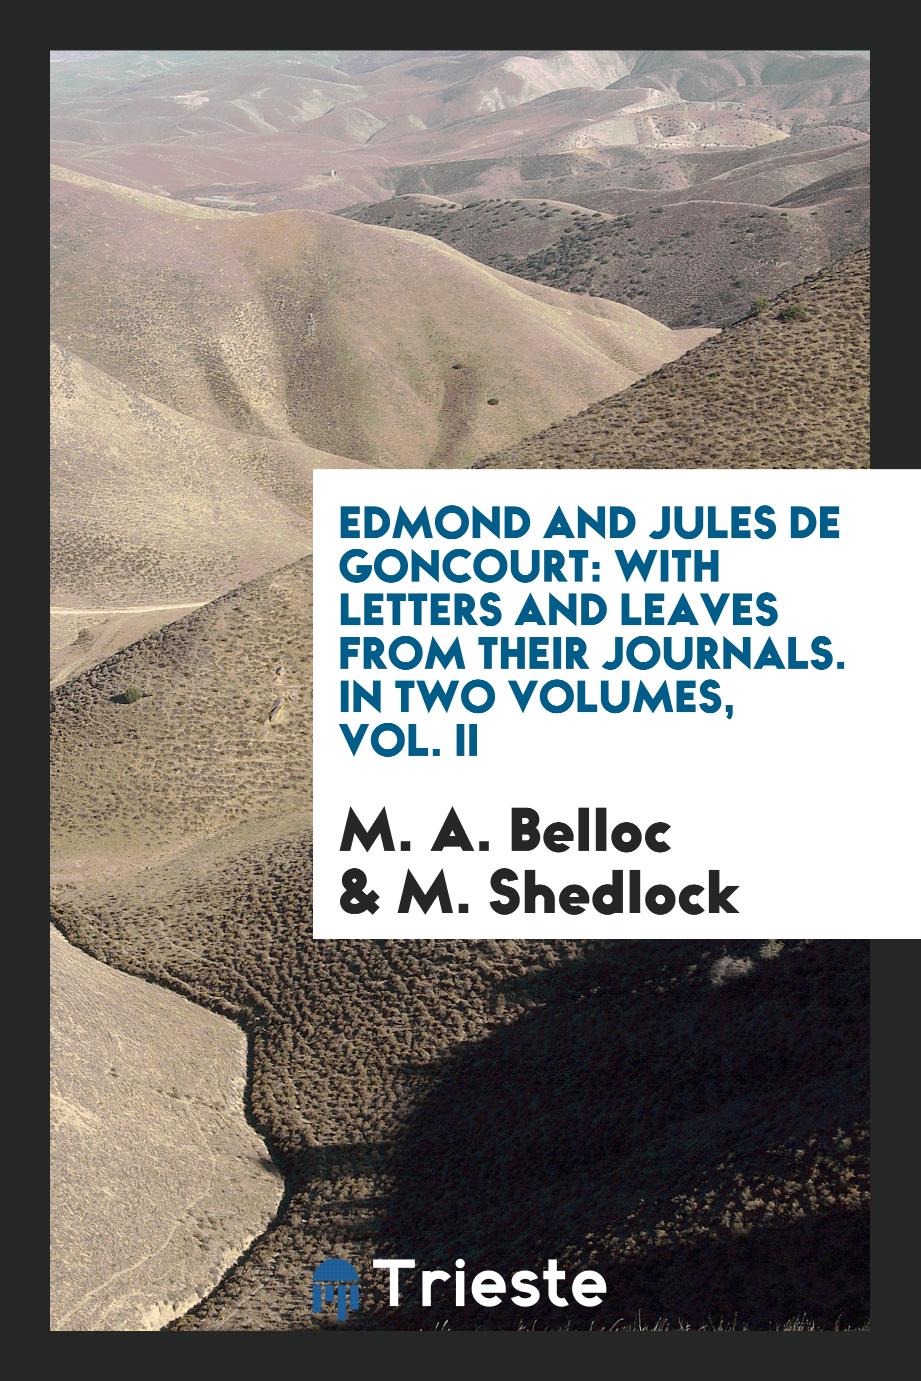 Edmond and Jules de Goncourt: With Letters and Leaves from Their Journals. In Two Volumes, Vol. II